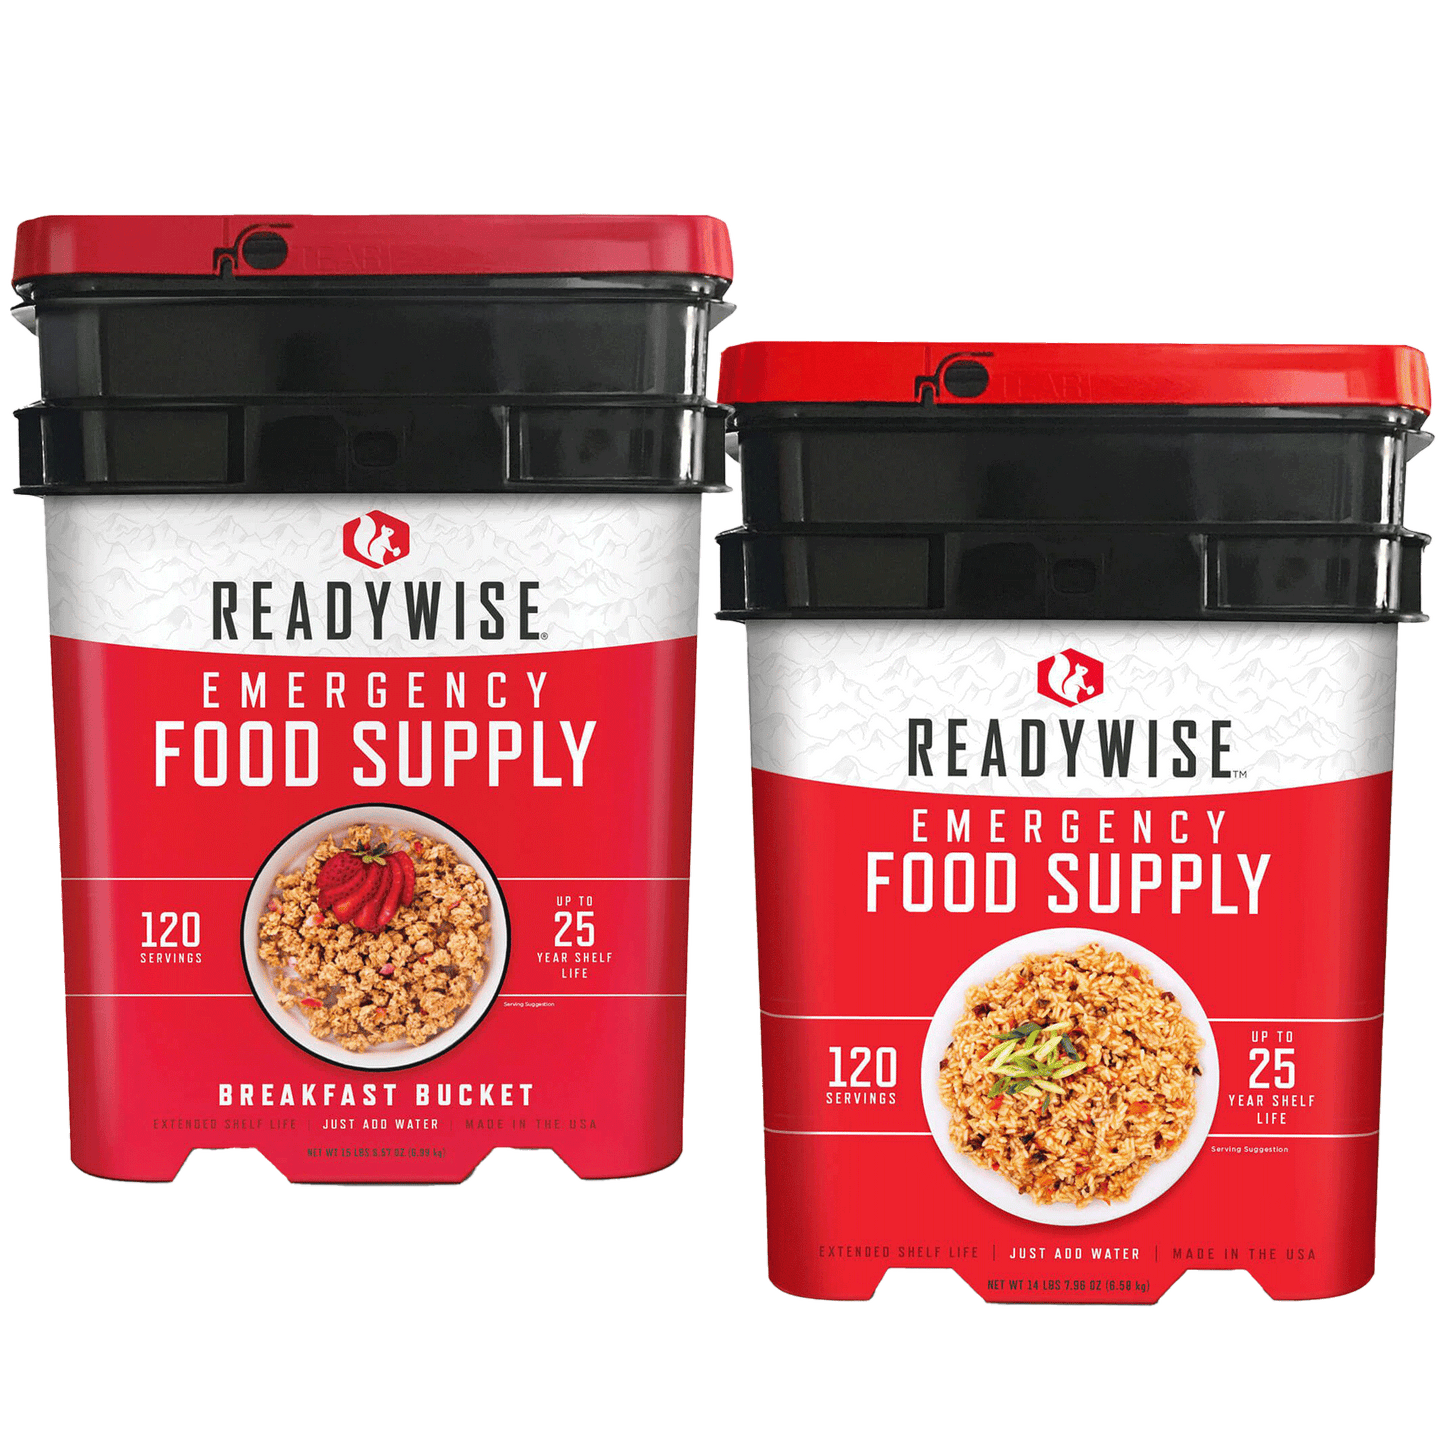 ReadyWise 120 Serving Breakfast Bucket and 120 Serving Emergency Food Supply Bucket displayed side by side